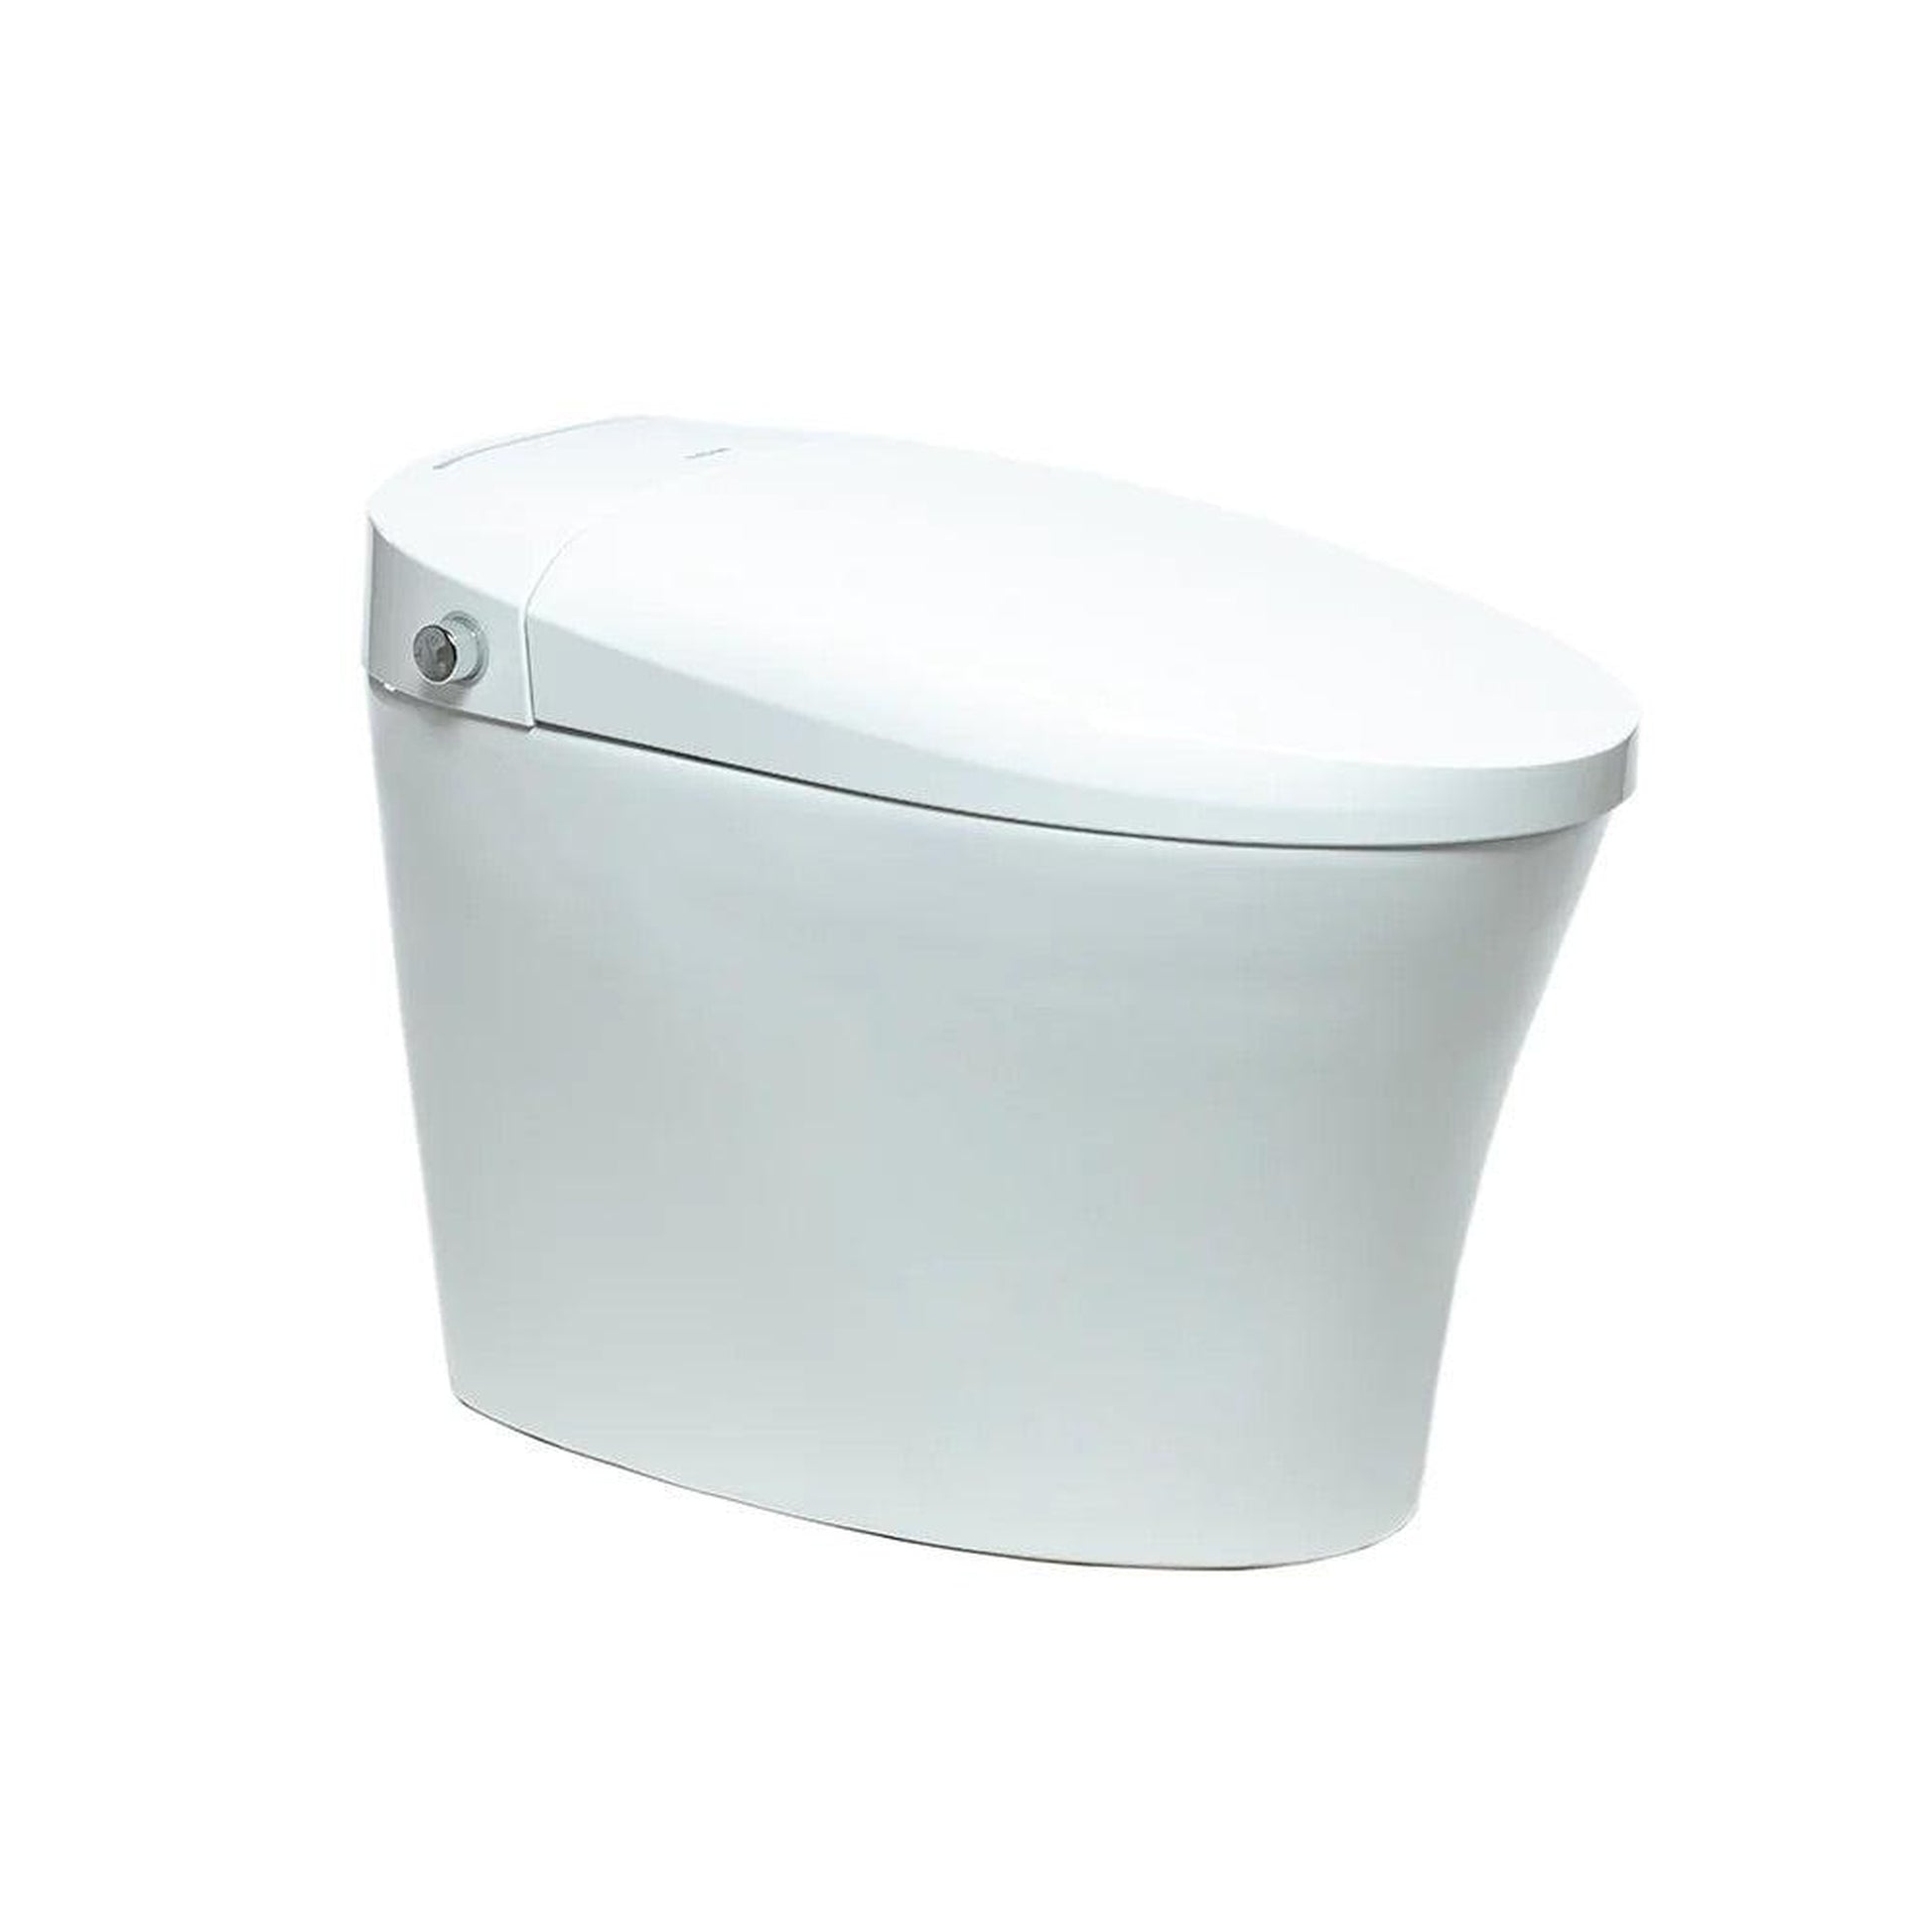 Trone Neodoro Elongated White Luxury Toilet With Smart Bidet and Remote Control